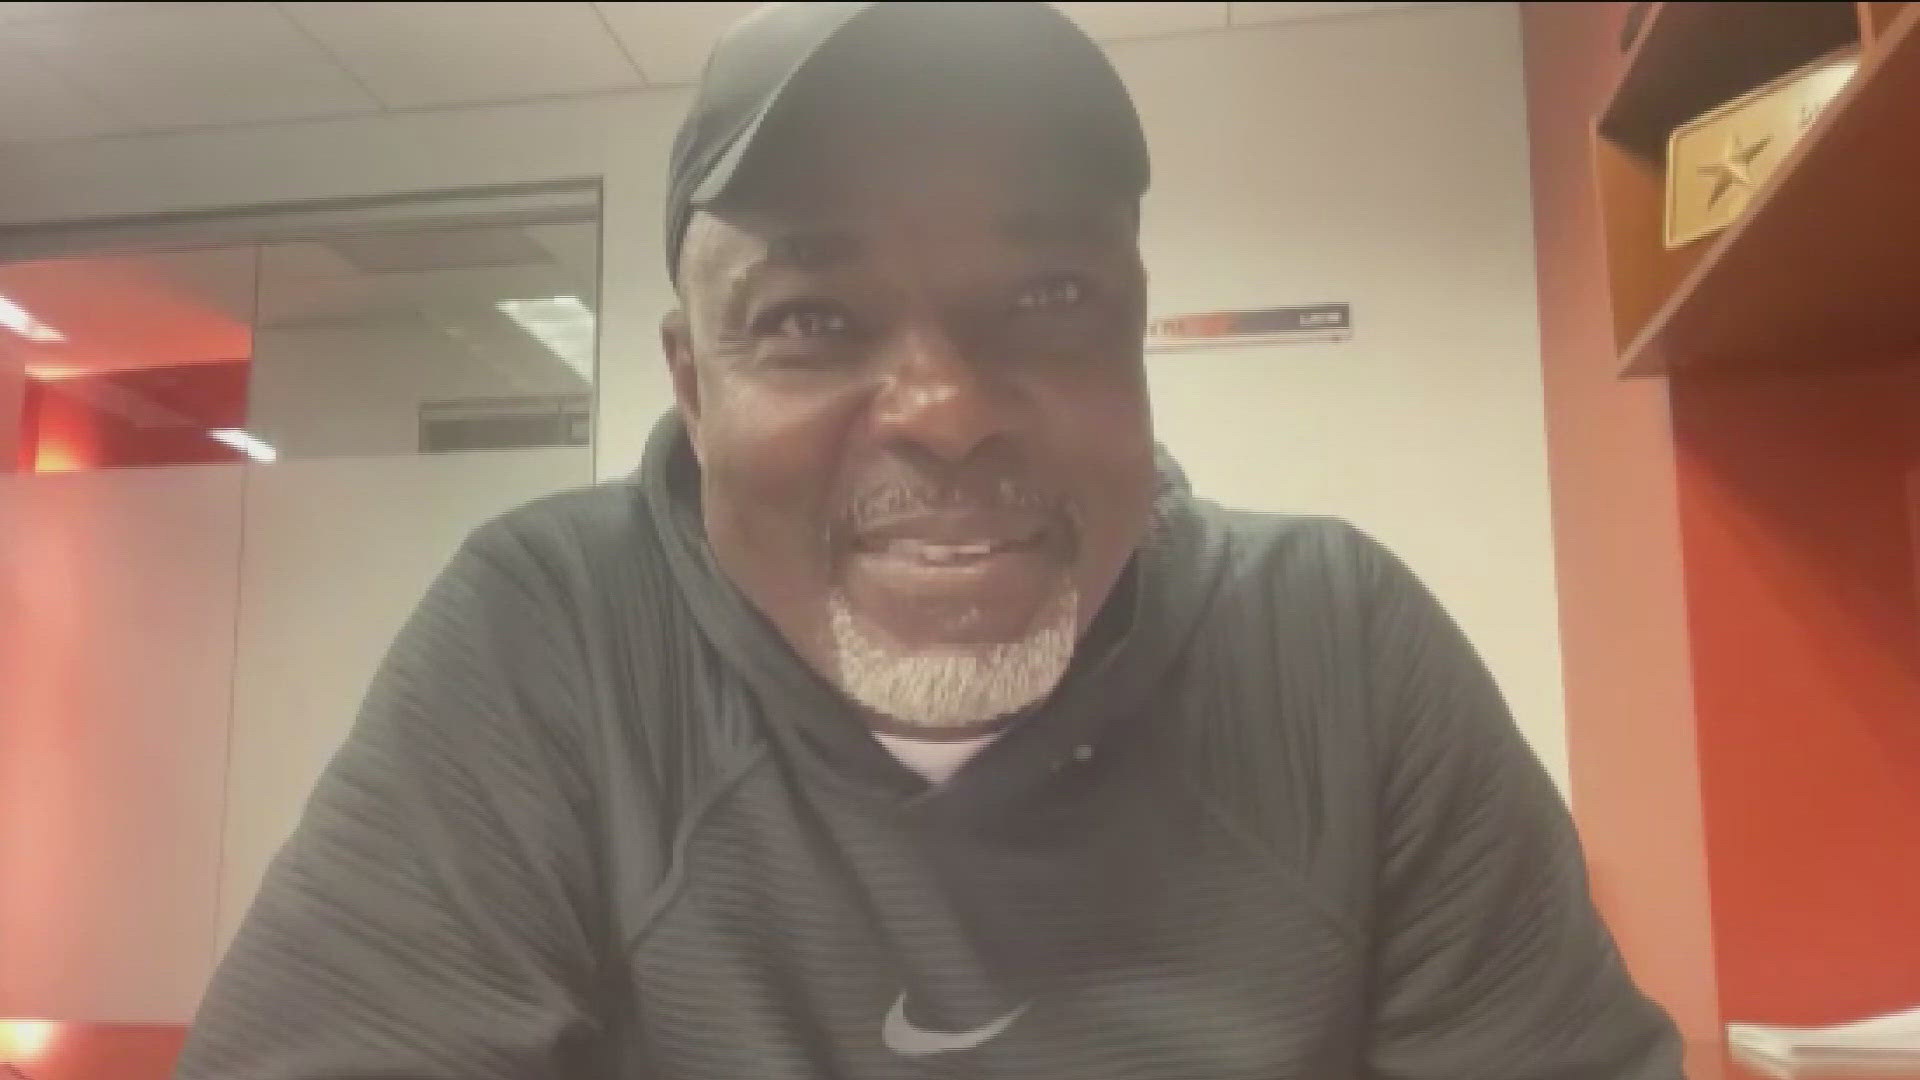 Texas head track coach Edrick Floréal has racked up 13 titles while at UT, and this weekend, the track team is hoping to add another Big 12 championship.